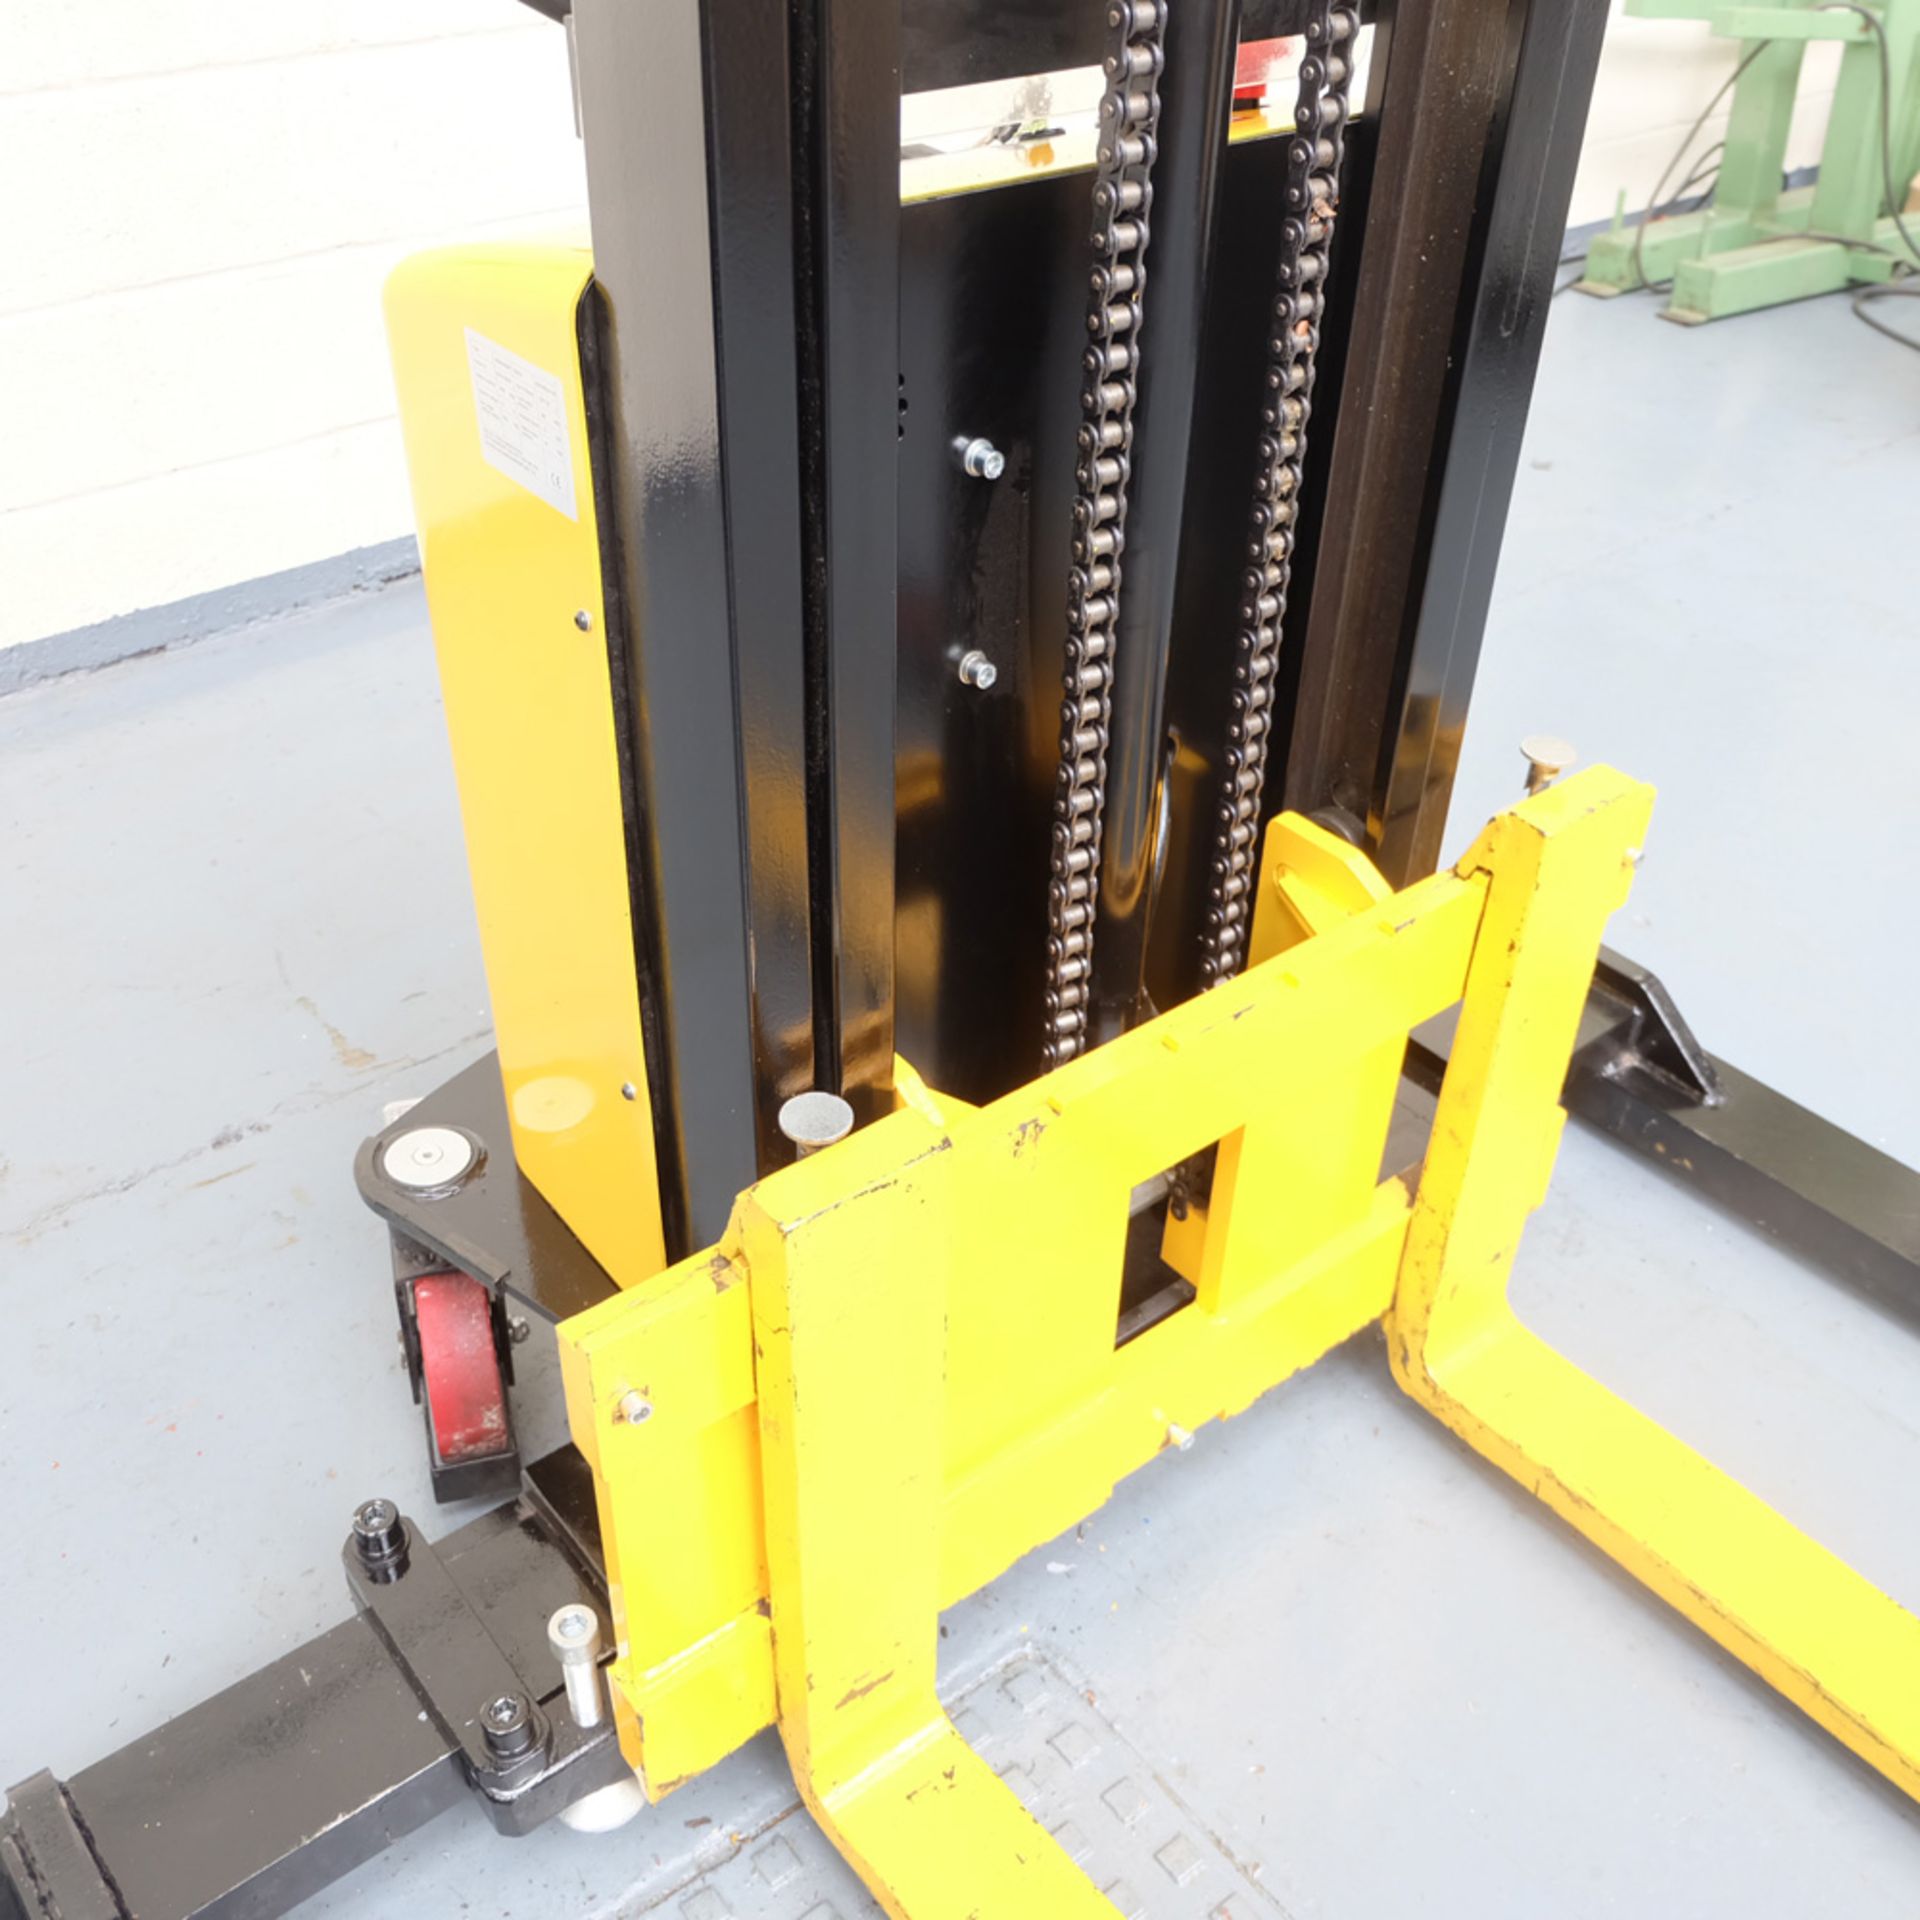 PTW Type Spmiow Pedestrian Hydraulic Pallet Lift Truck With ADJ Outriggers. - Image 4 of 12